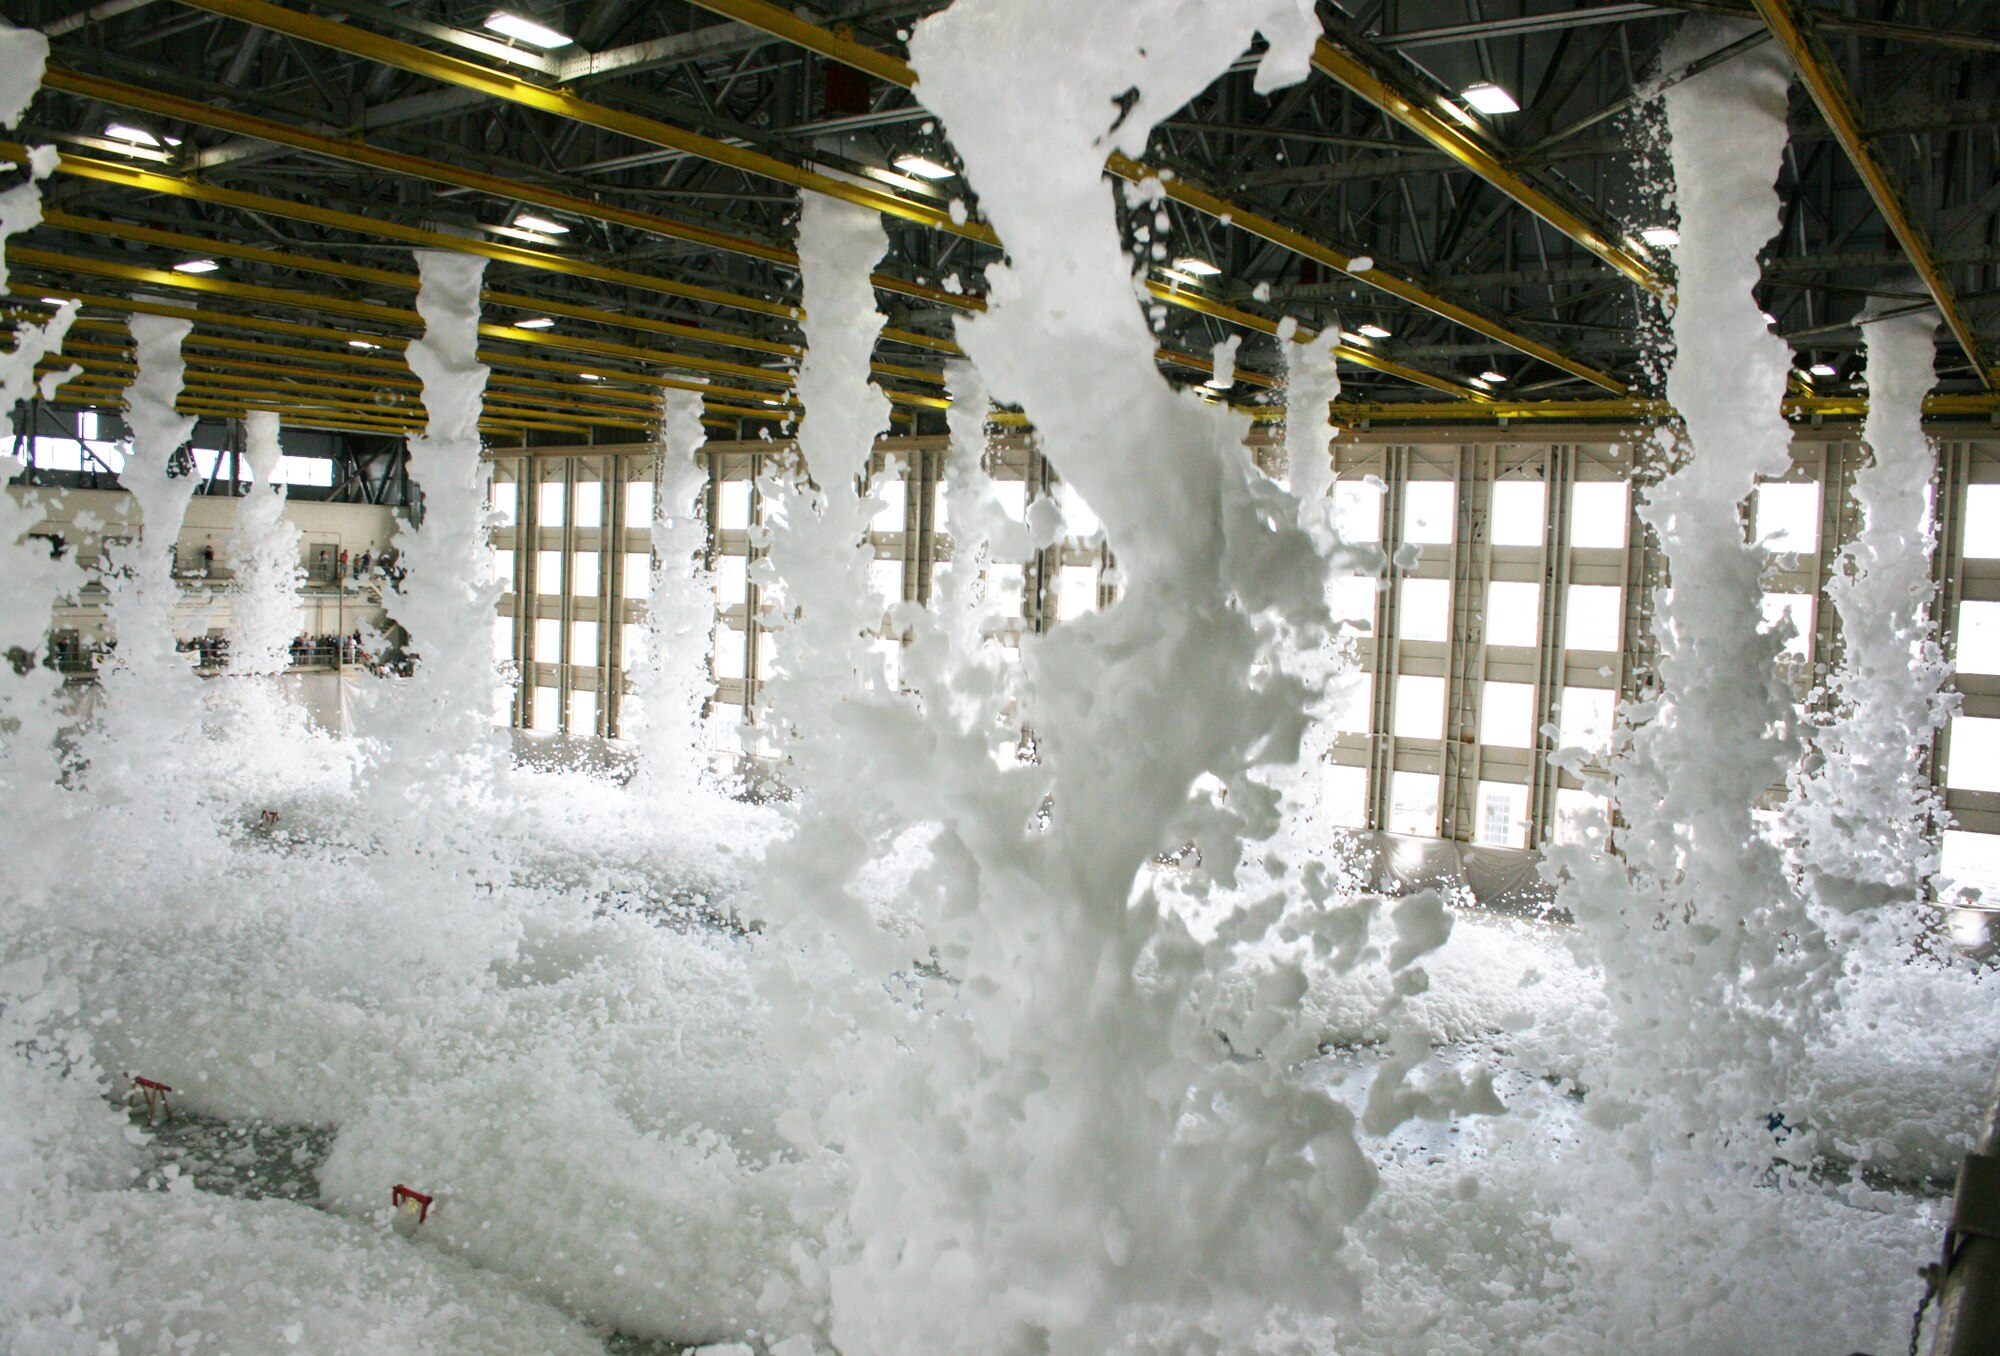 Approximately 110 gallons of biodegradable foam poured from the ceiling of King Hangar Sept. 3 at Eglin Air Force Base during the final test of the new fire suppression system.  It took only two minutes for the 24 foam generators to fill the 90,000 square foot hangar with more than three feet of foam.  This was part of an ongoing process to update the historic Eglin icon.  (U.S. Air Force photo/2nd Lt. Andrew Caulk.)